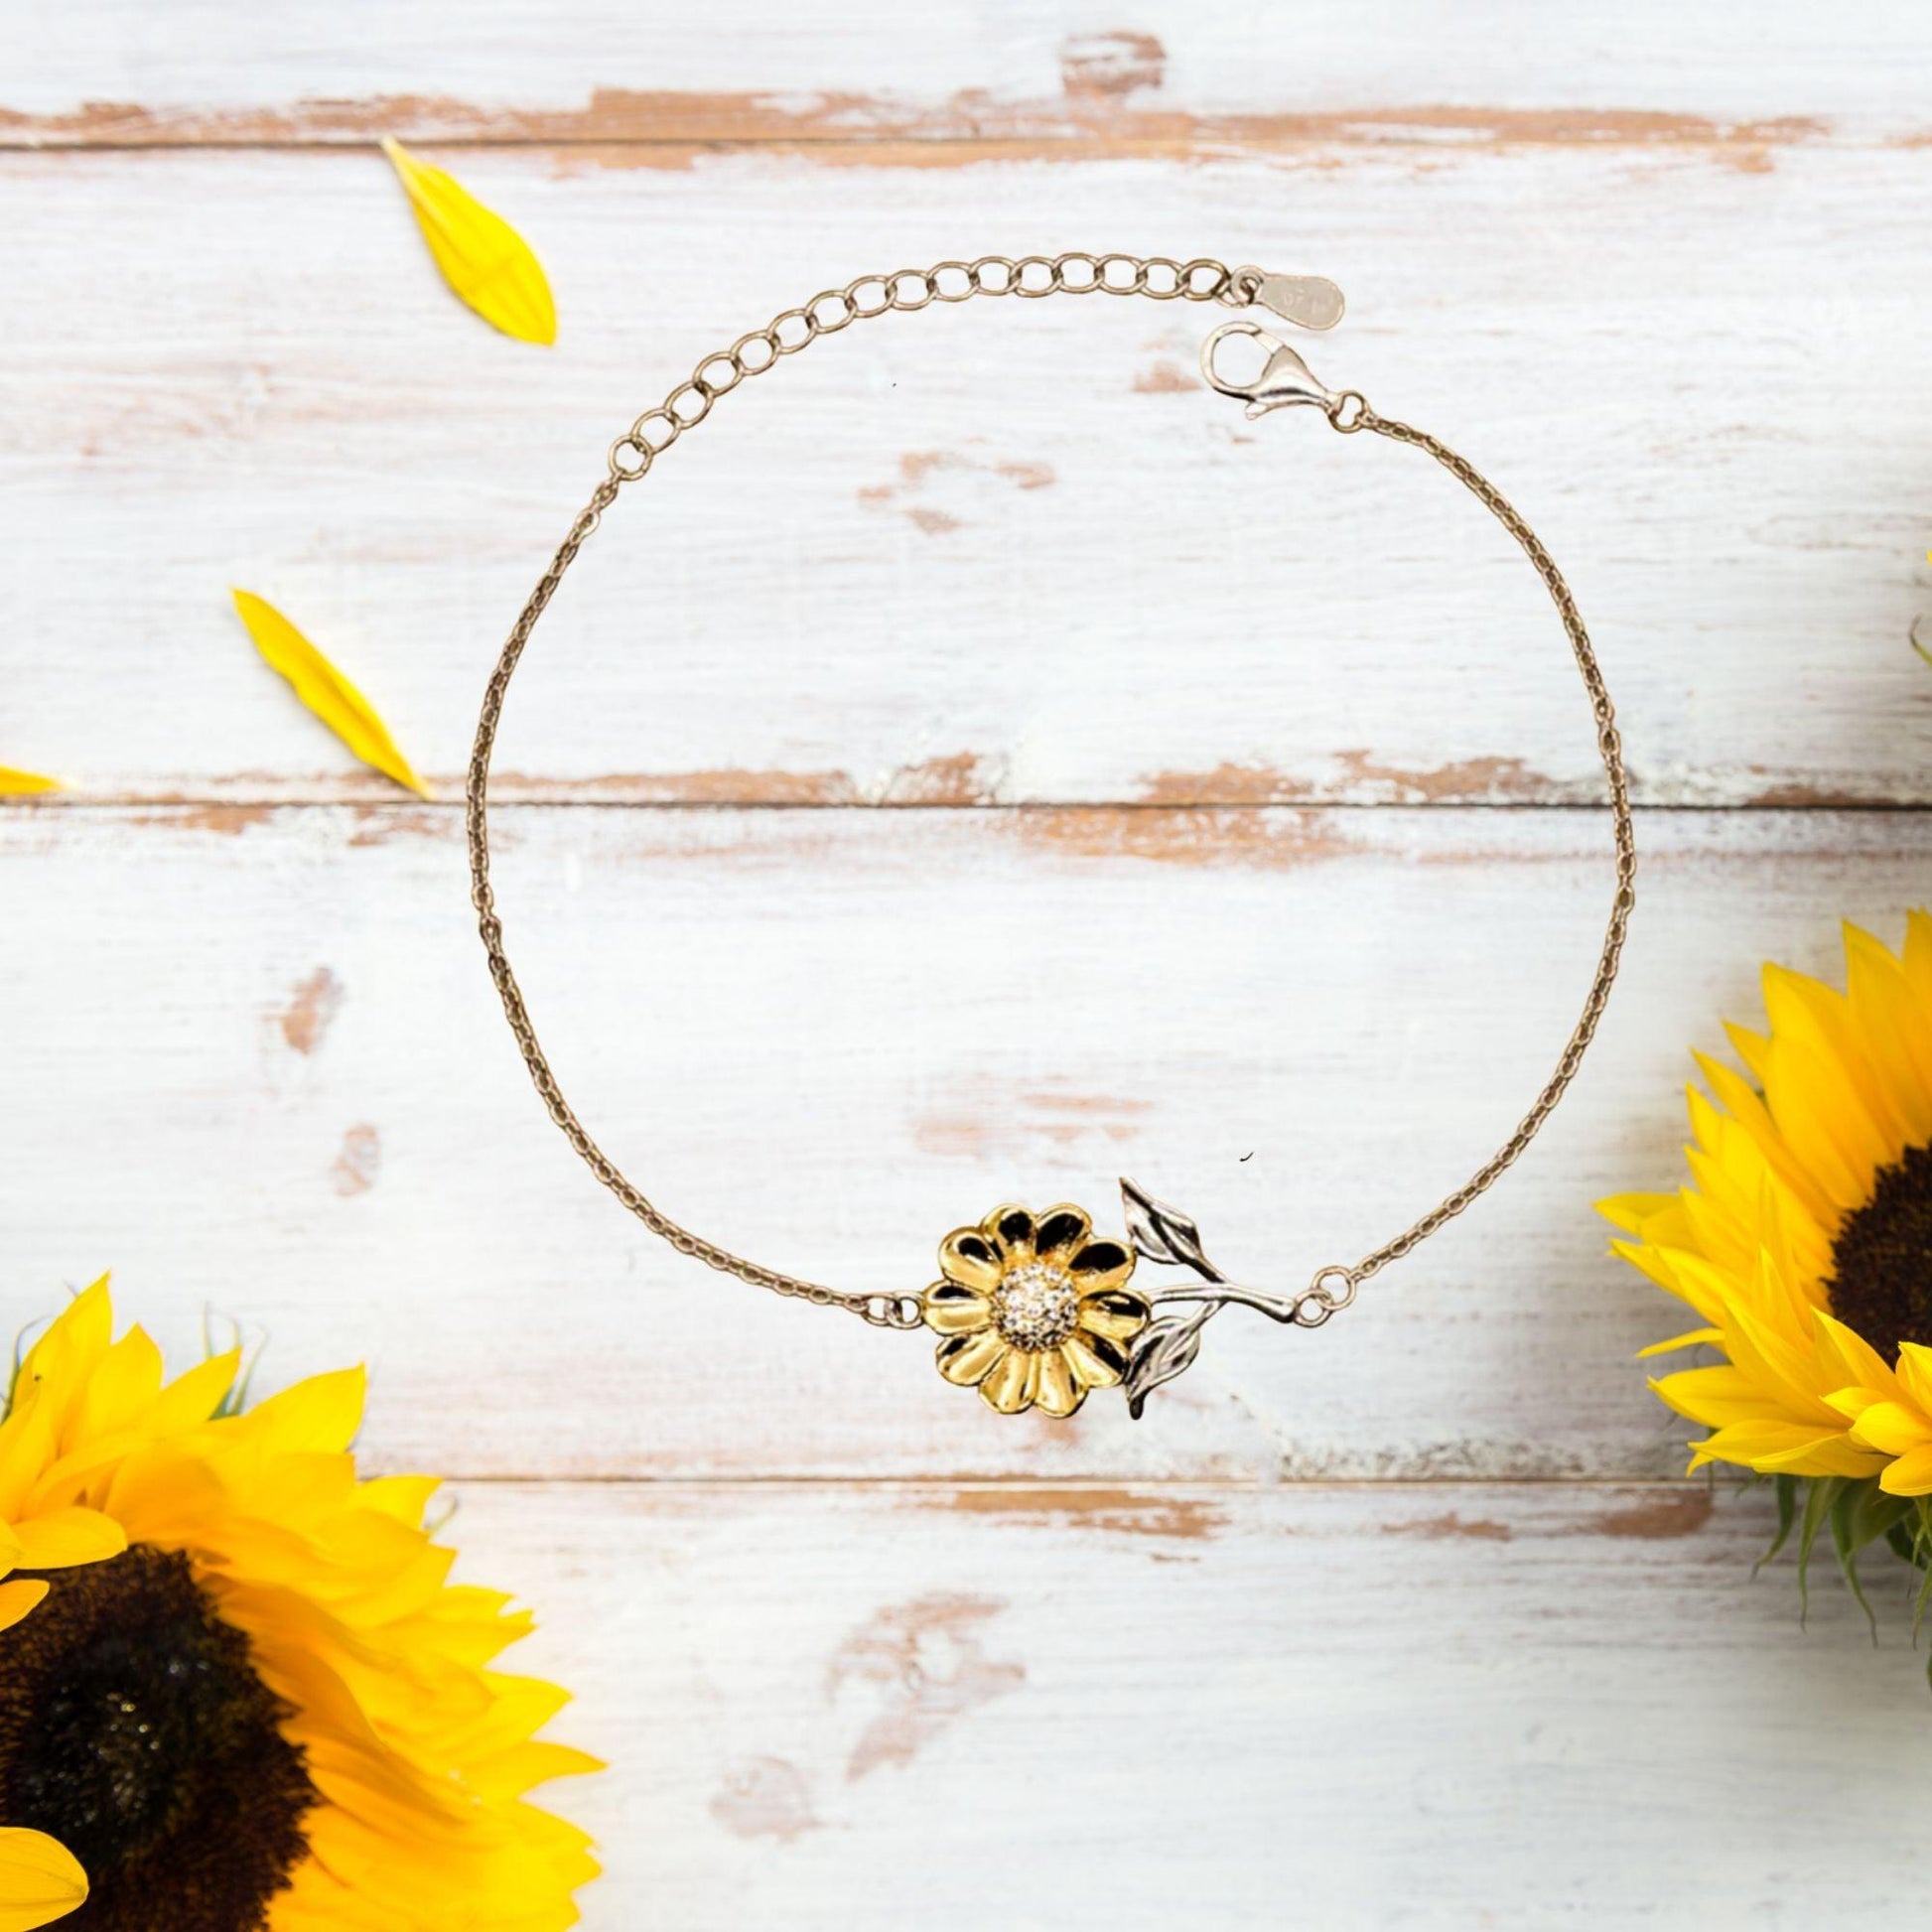 Nanny Sunflower Bracelet - Thanks for being who you are - Birthday Christmas Jewelry Gifts Coworkers Colleague Boss - Mallard Moon Gift Shop